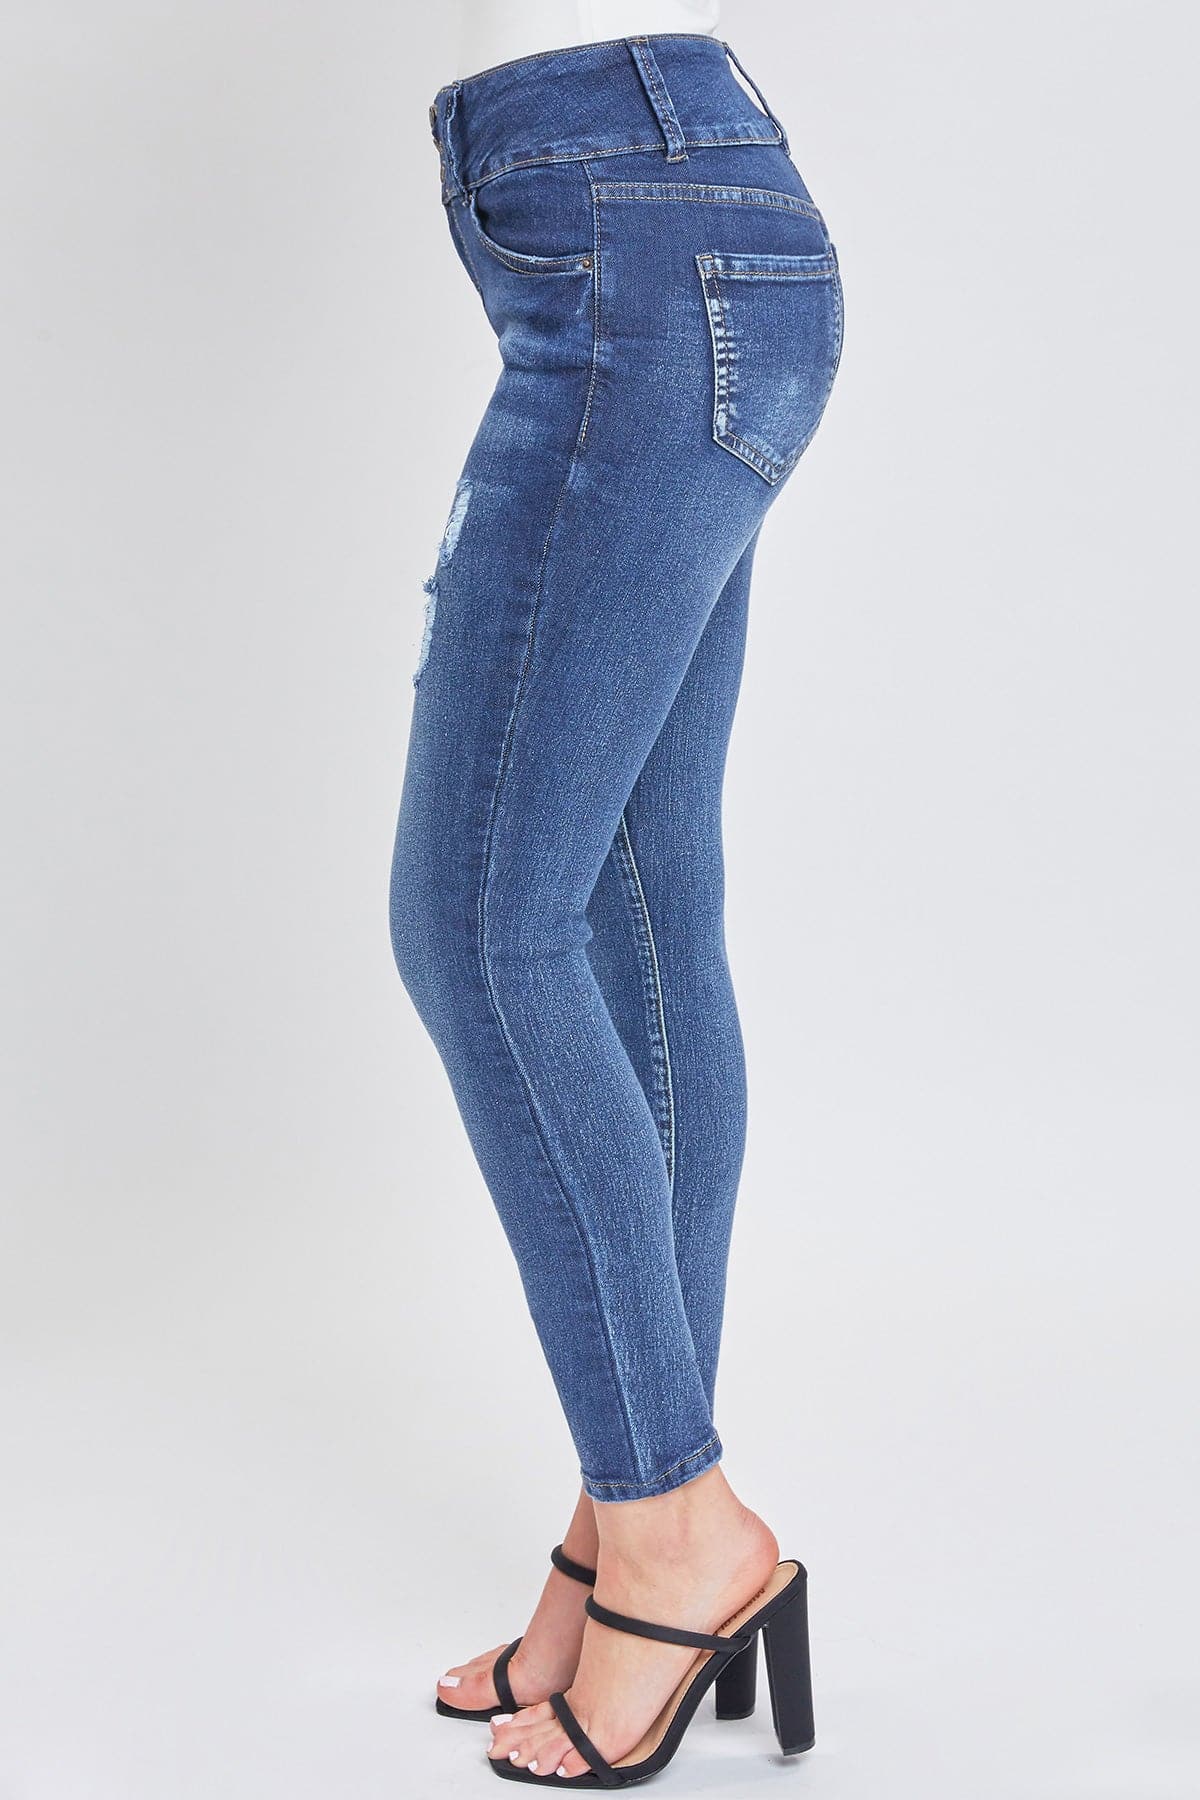 Women's Essential Sustainable Distressed Skinny Jean